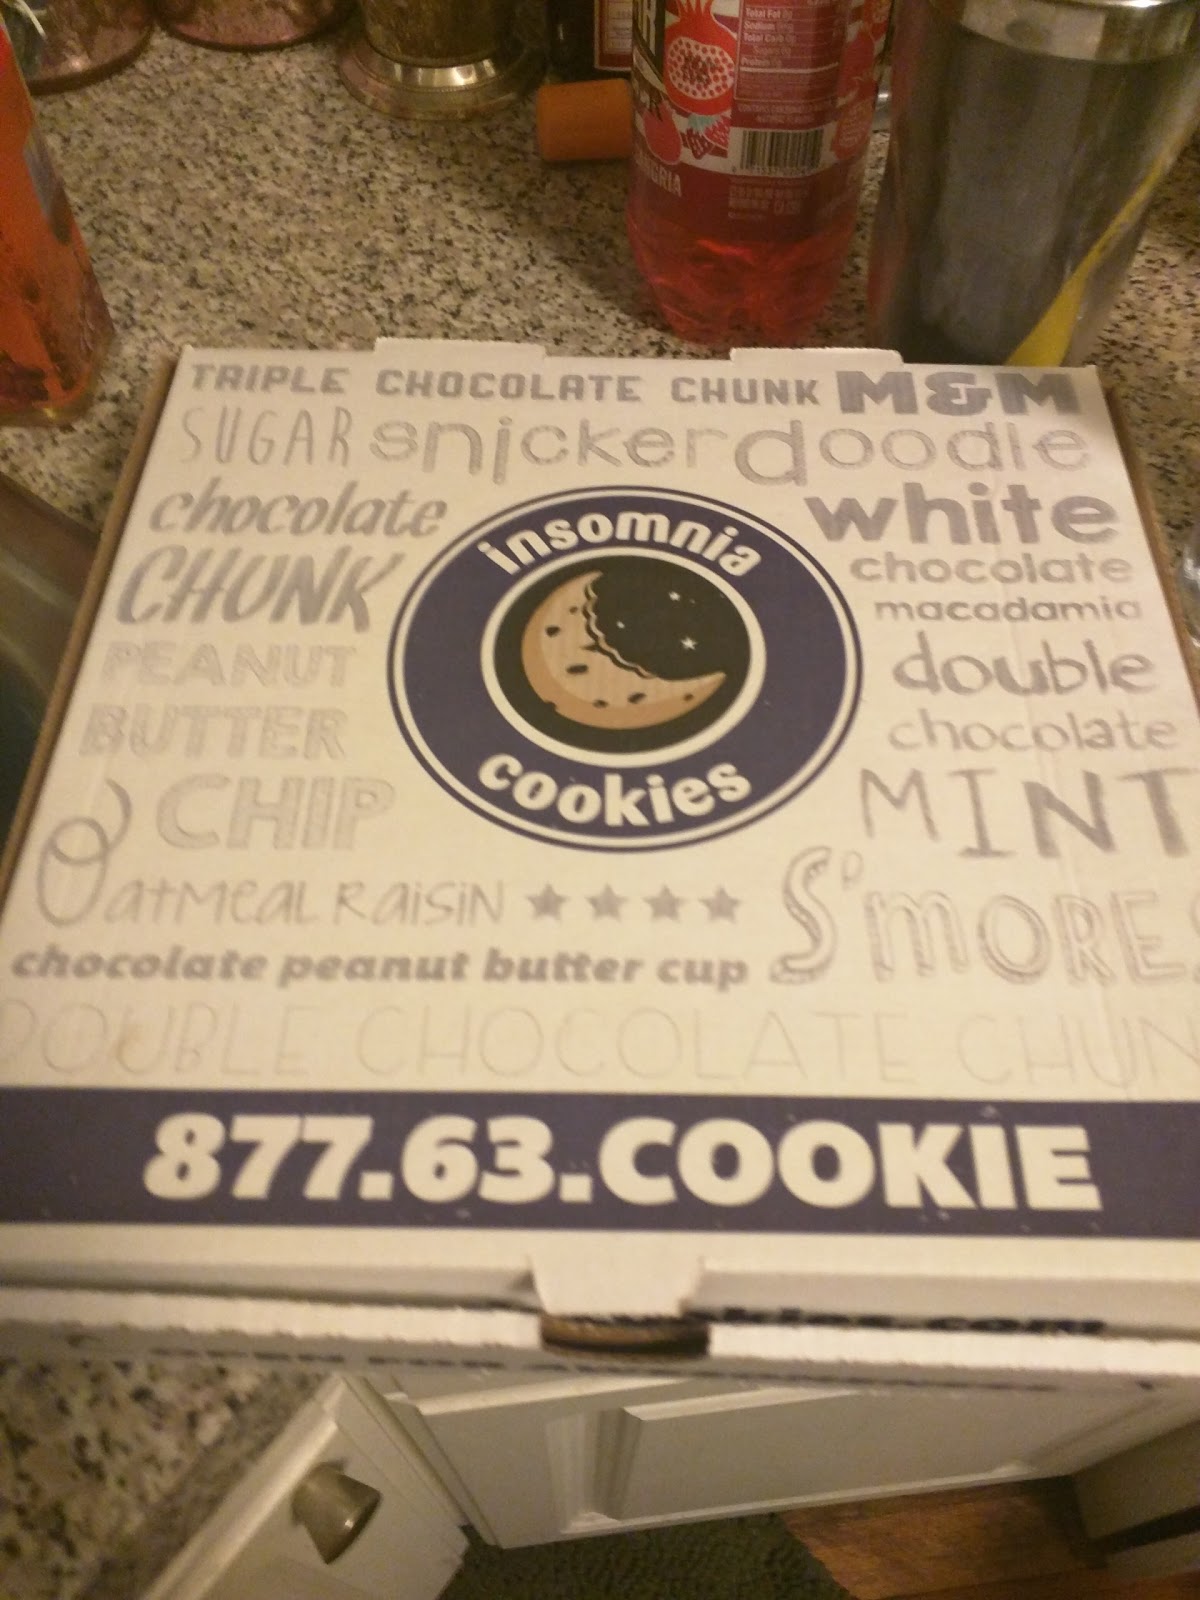 Photo of Insomnia Cookies in New York City, New York, United States - 1 Picture of Restaurant, Food, Point of interest, Establishment, Store, Bakery